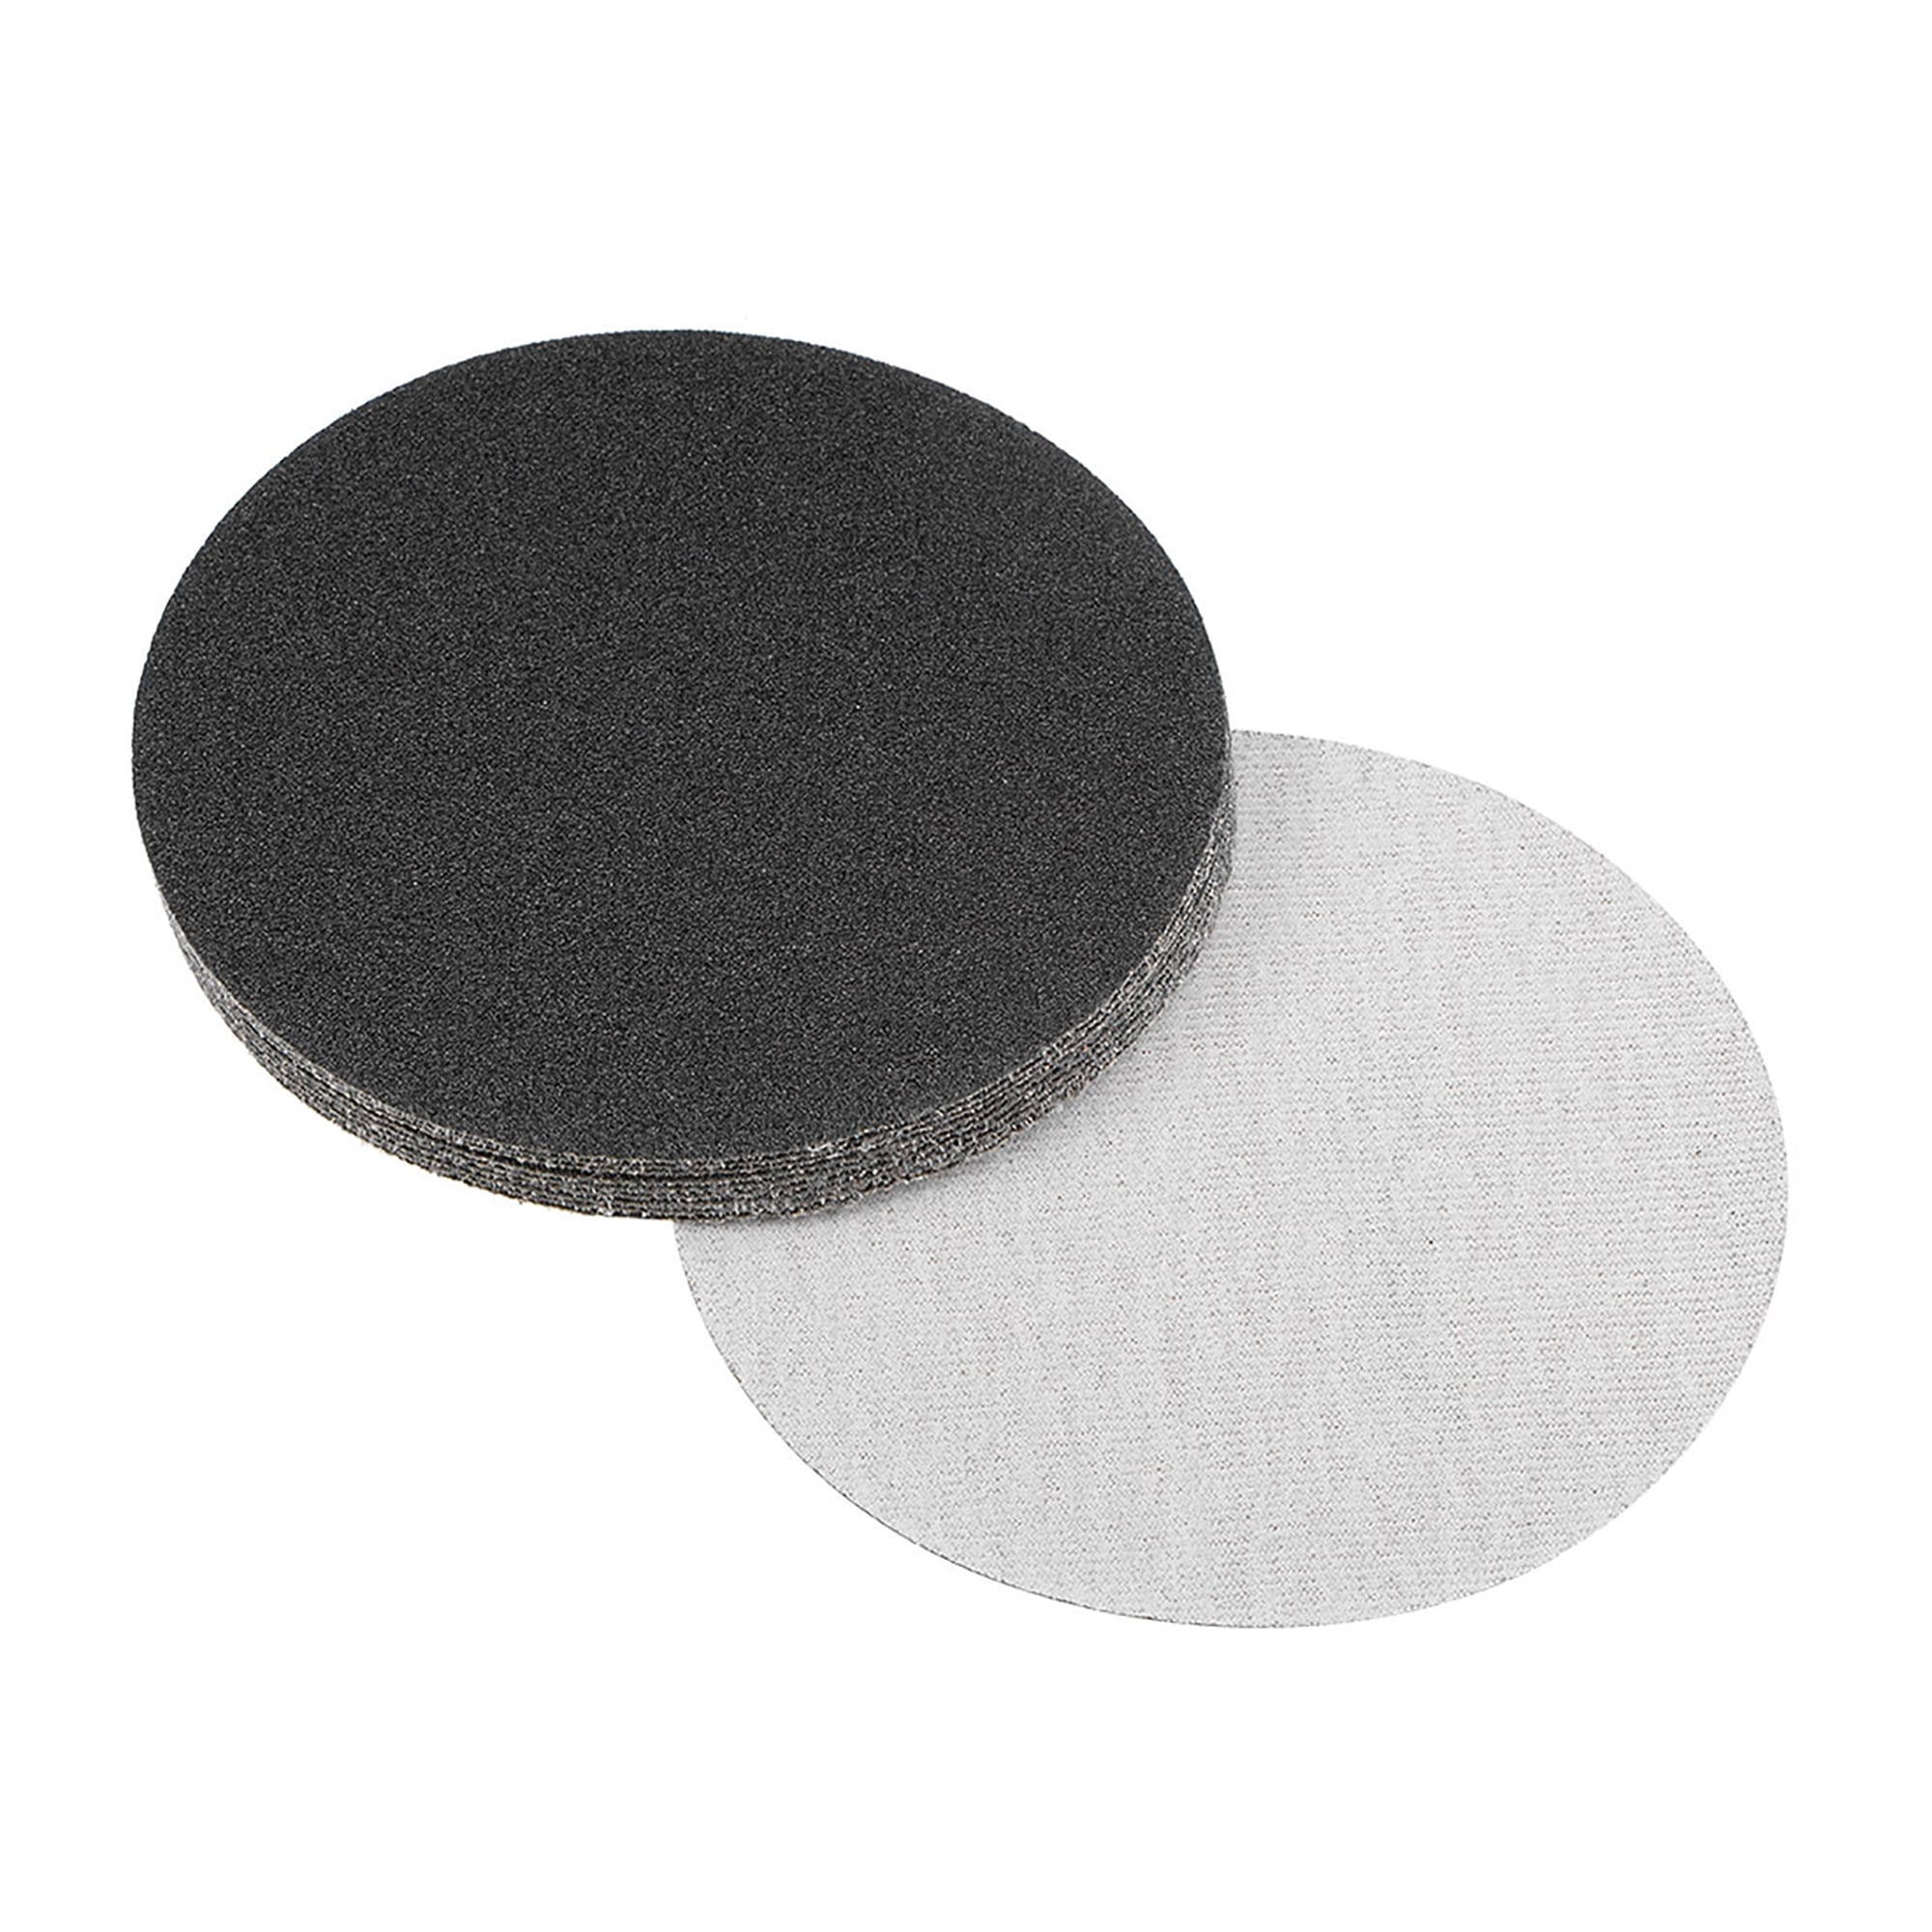 uxcell 5 Inch Wet Dry Sanding Discs 80 Grit Hook and Loop Sanding Disc Silicon Carbide Sandpaper 10pcs